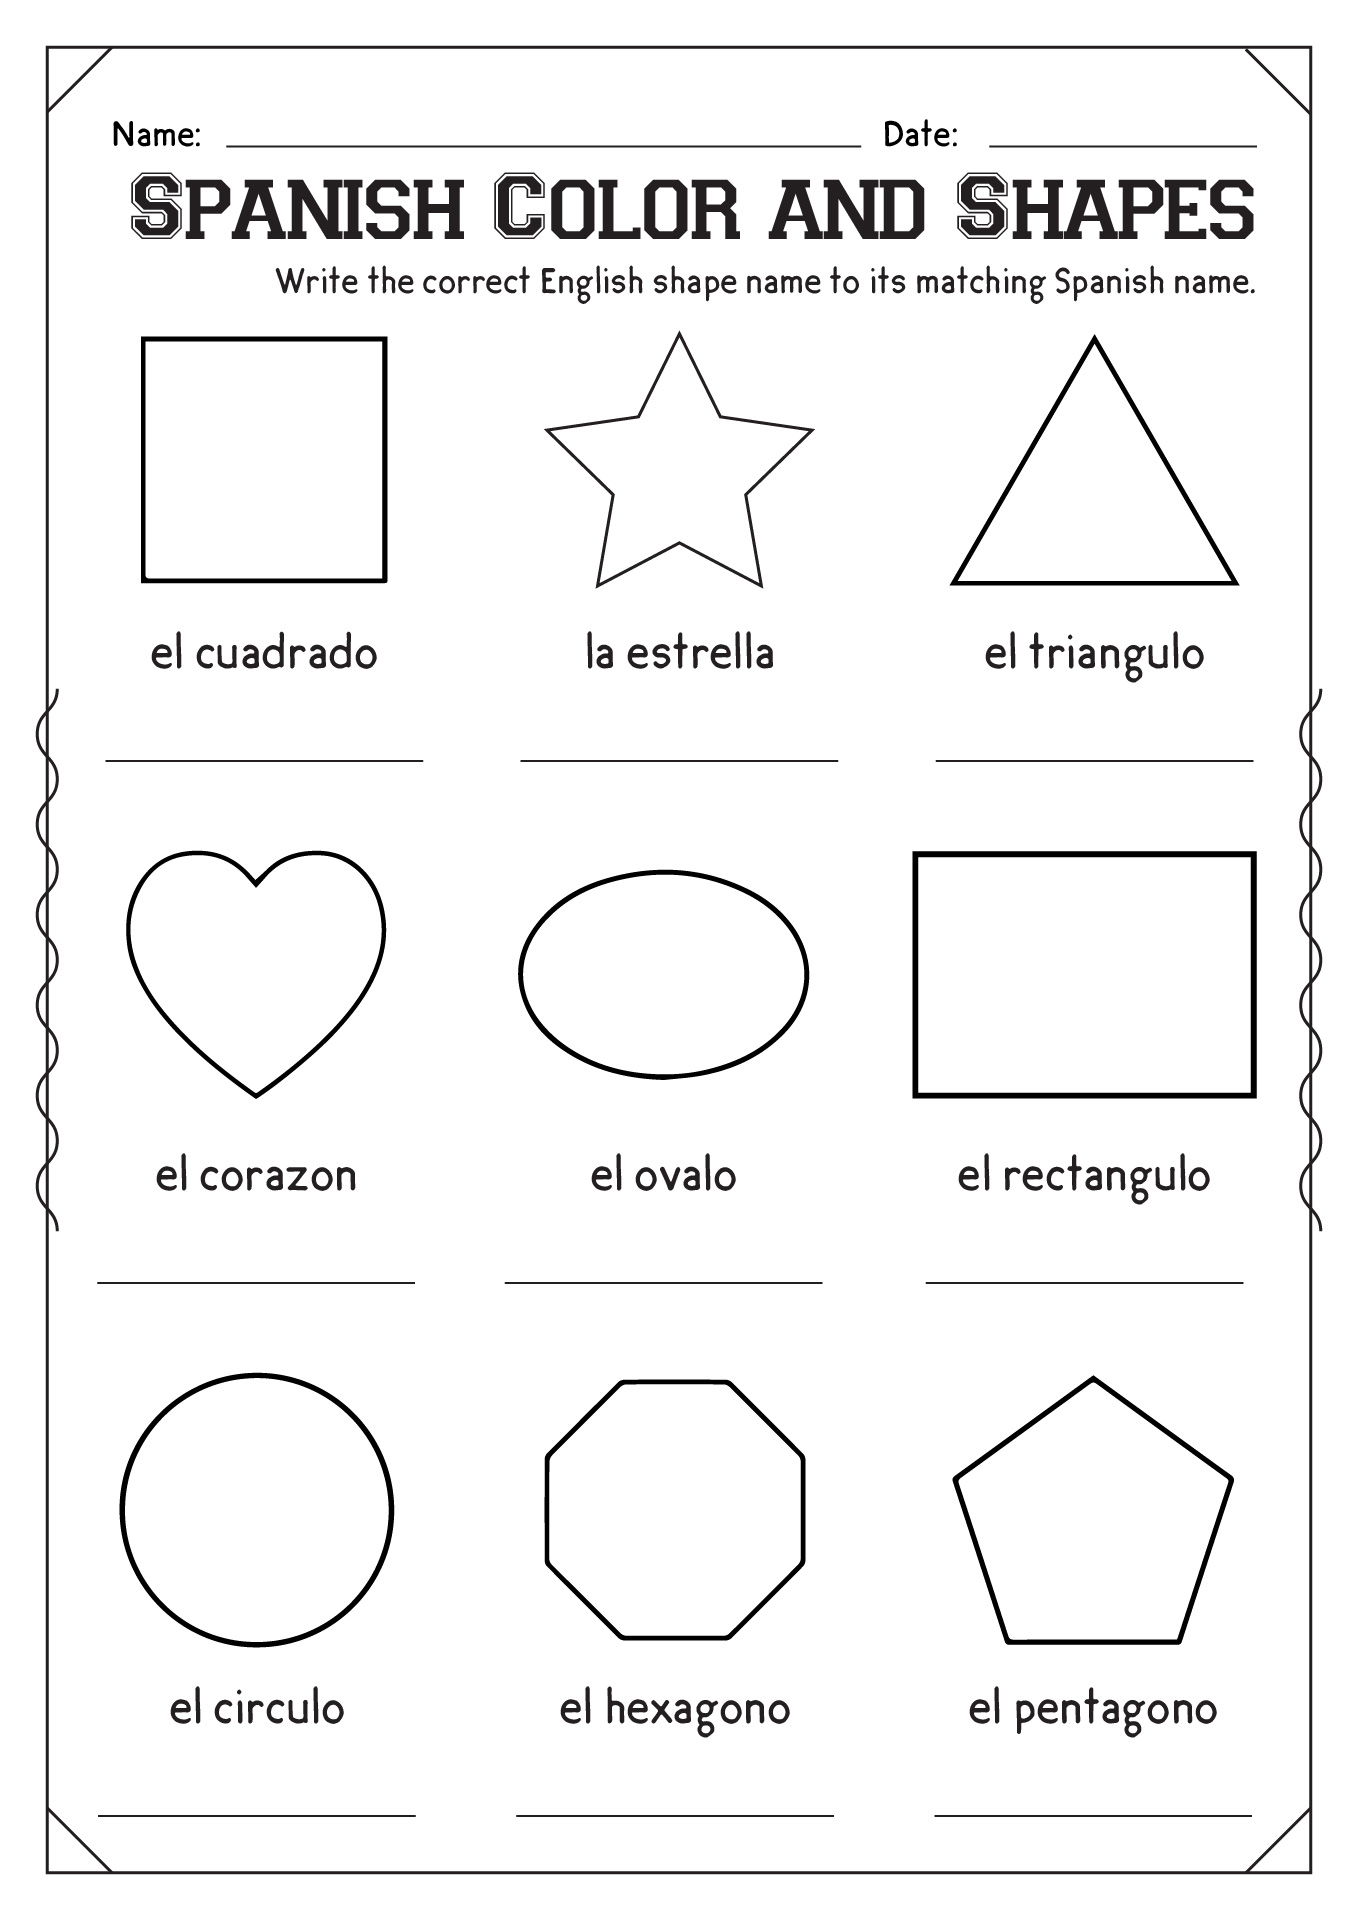 Spanish Colors and Shapes Worksheets Image